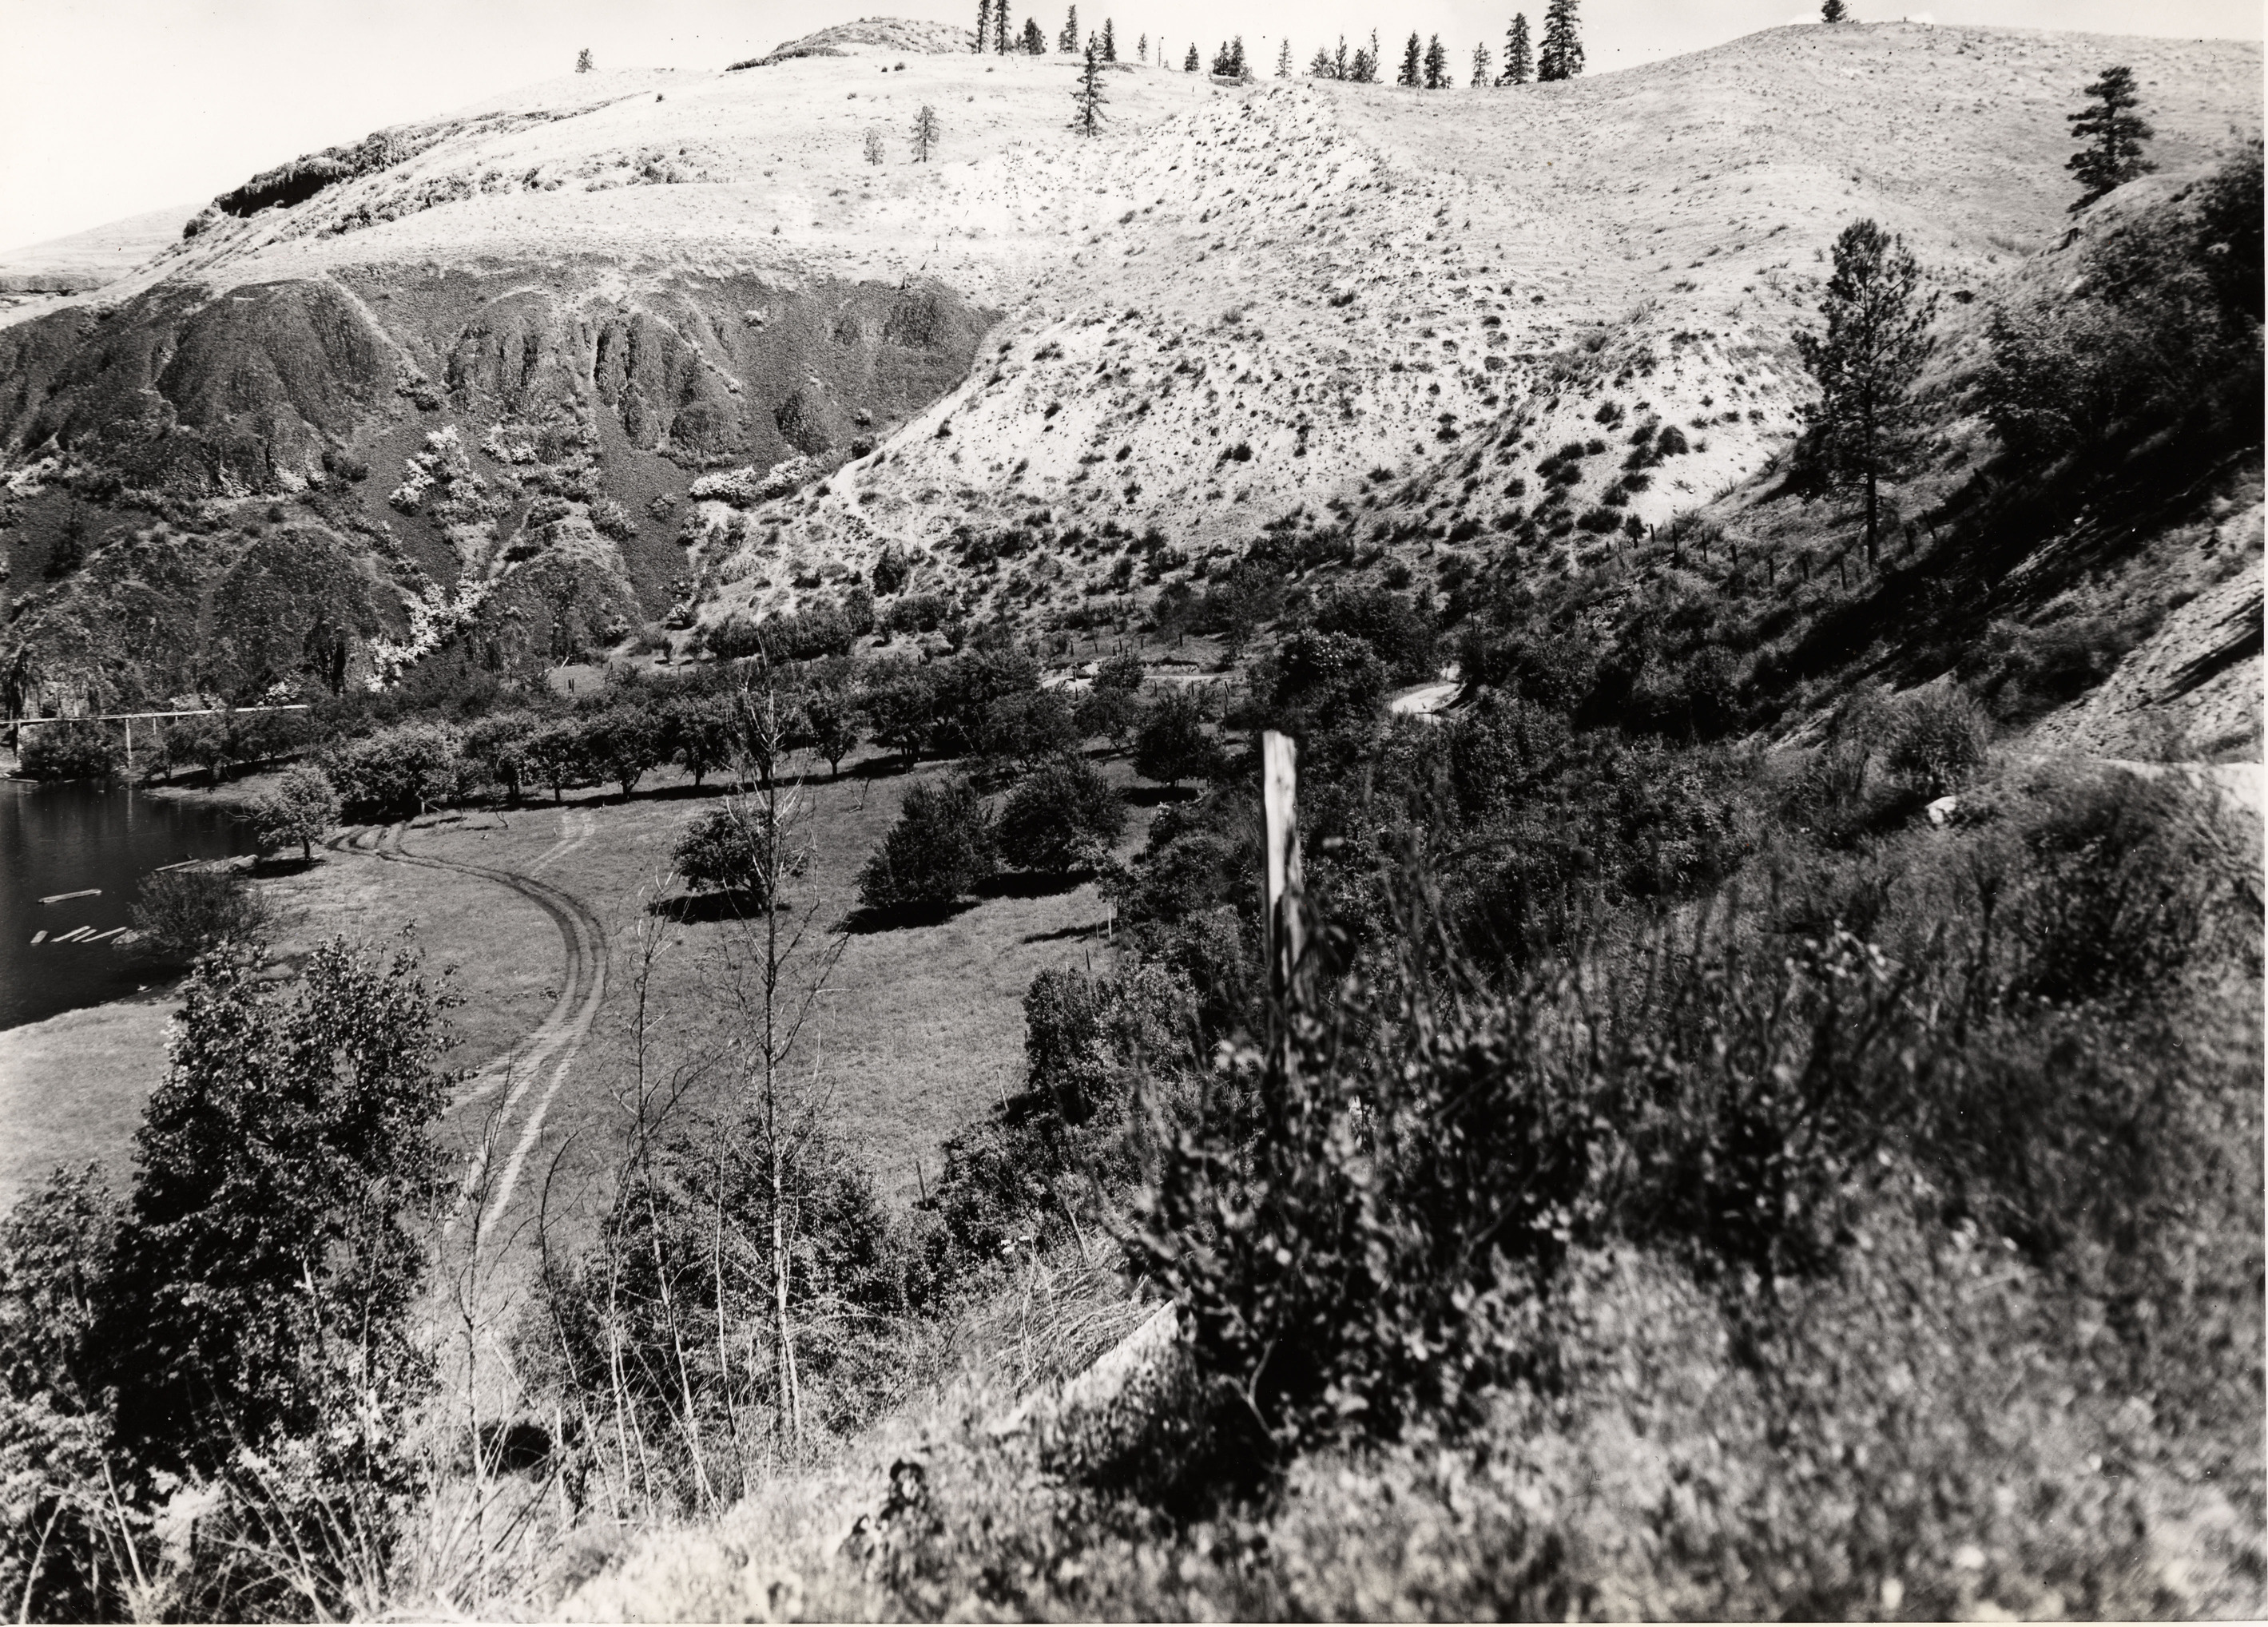 Black and white photograph of a clearing surrounded by trees next to a body of water, surrounded by steep rocky cliffs